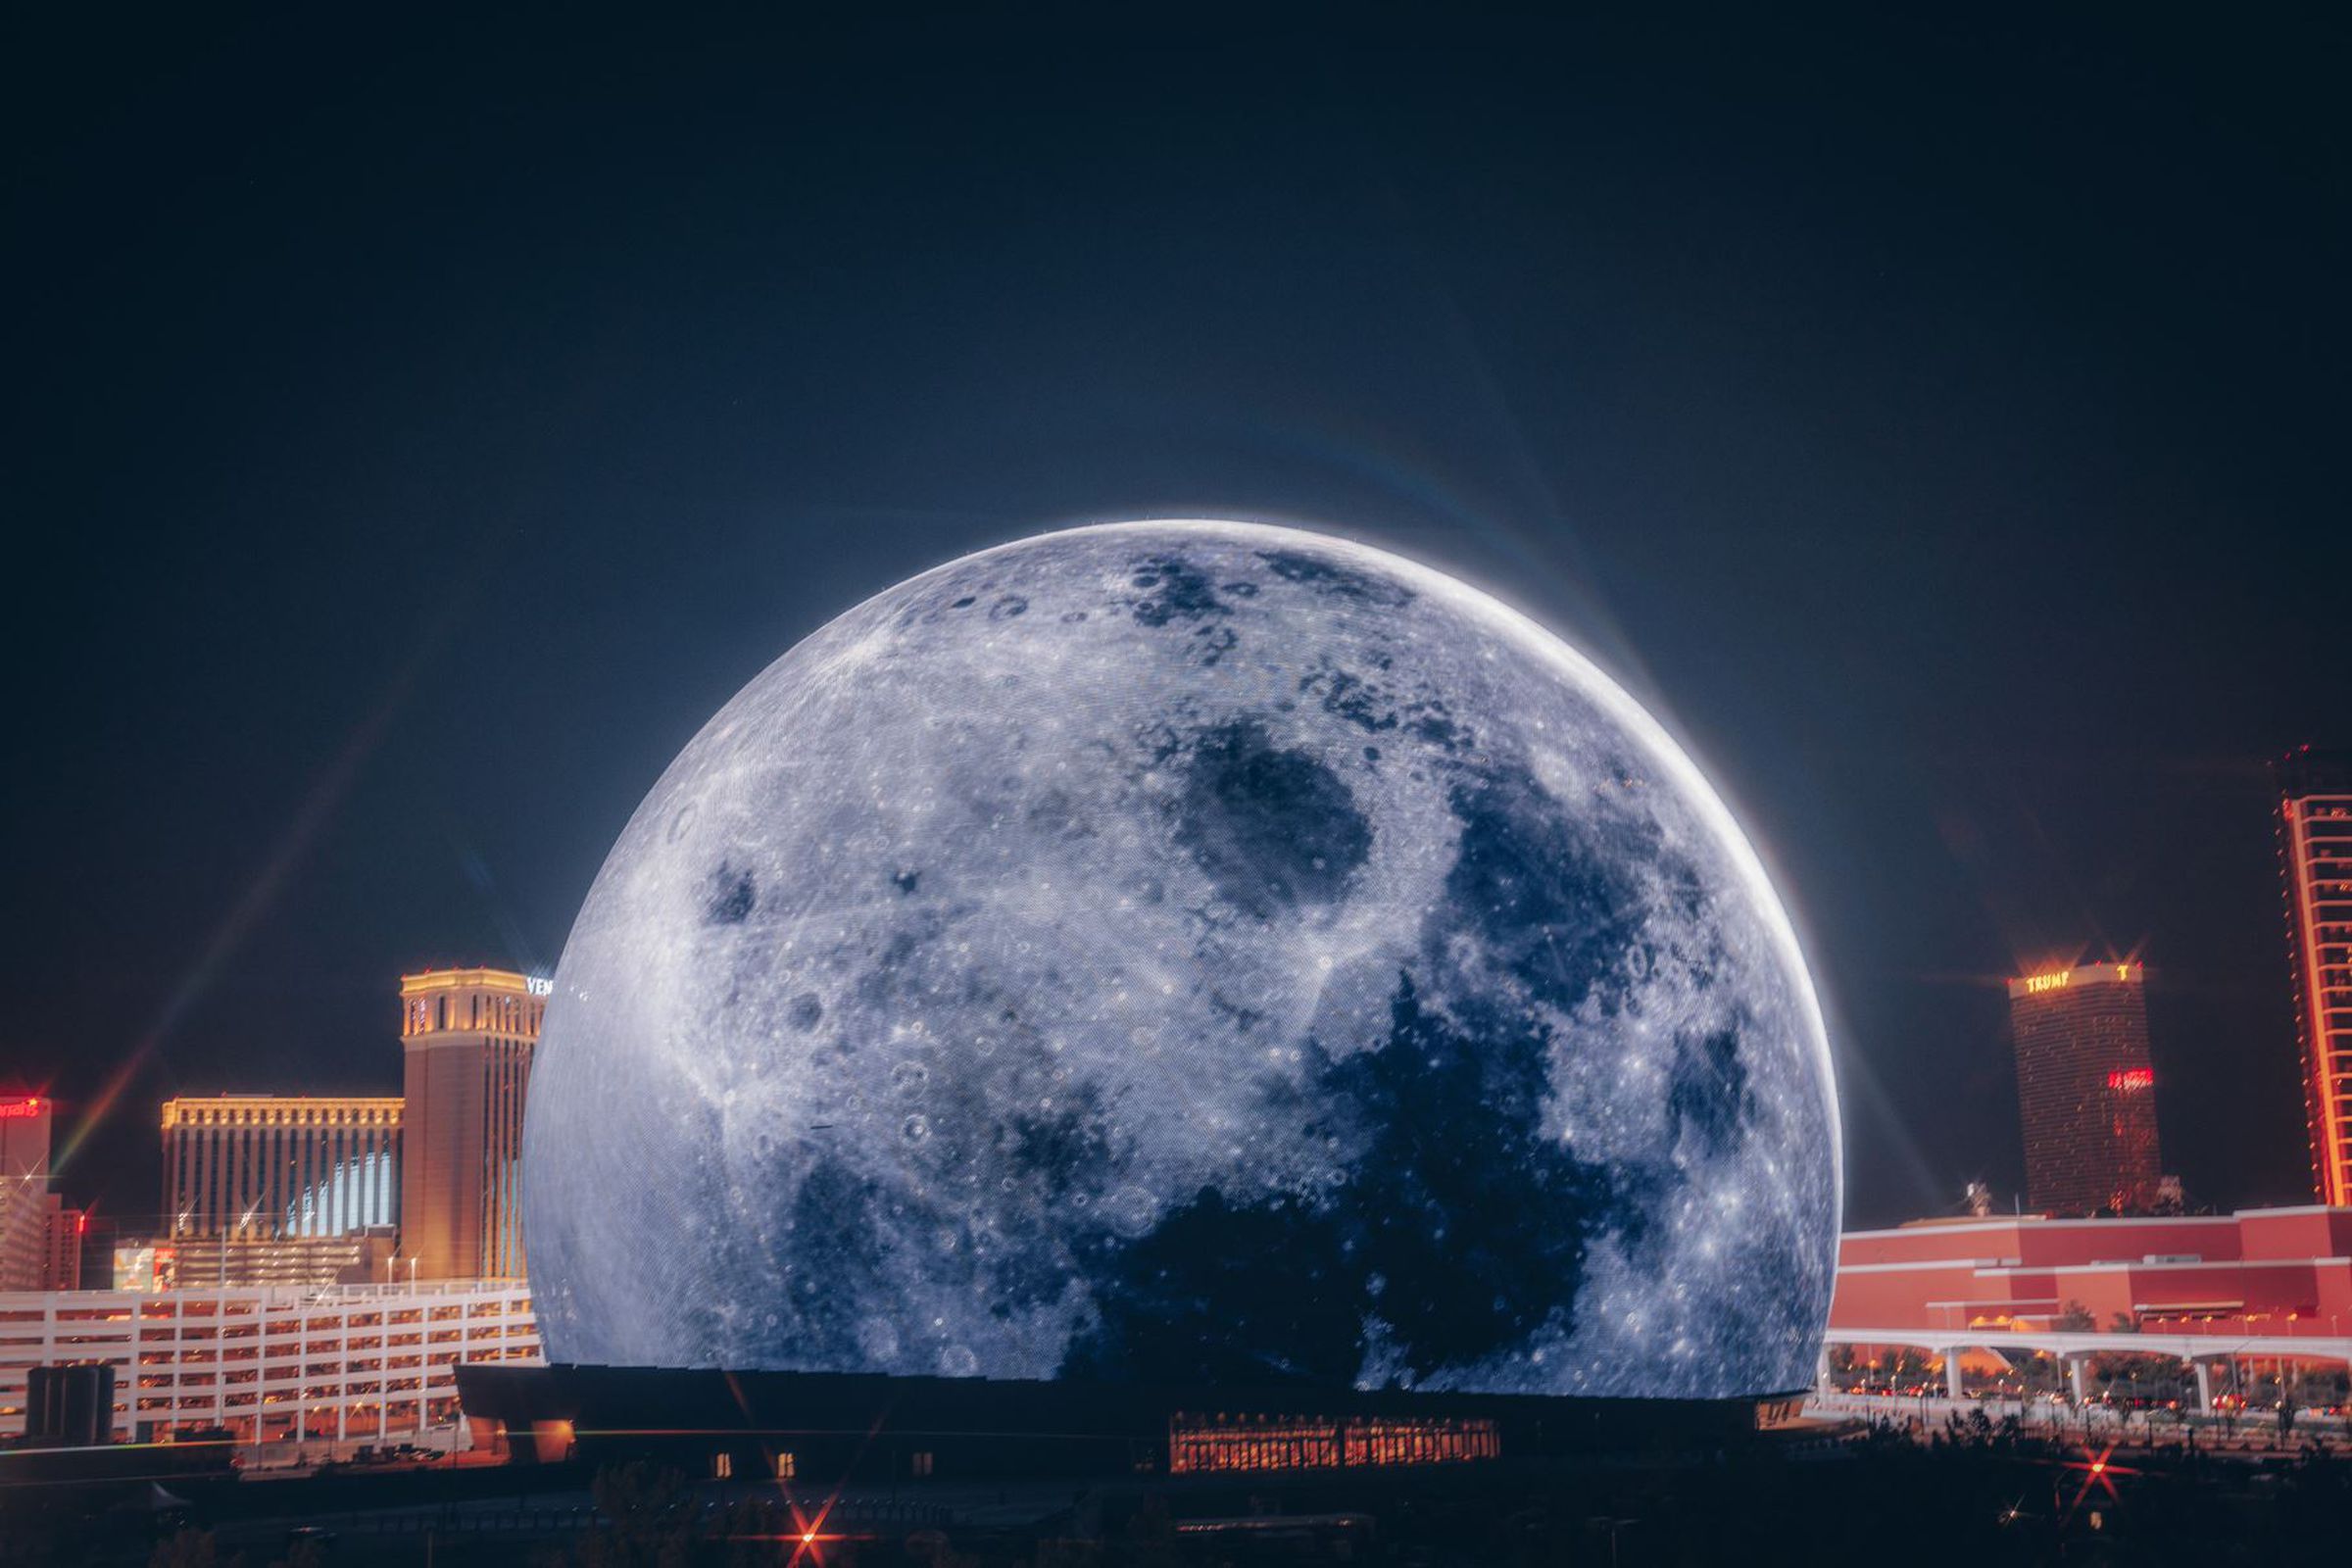 A photo showing the Sphere with a Moon exterior